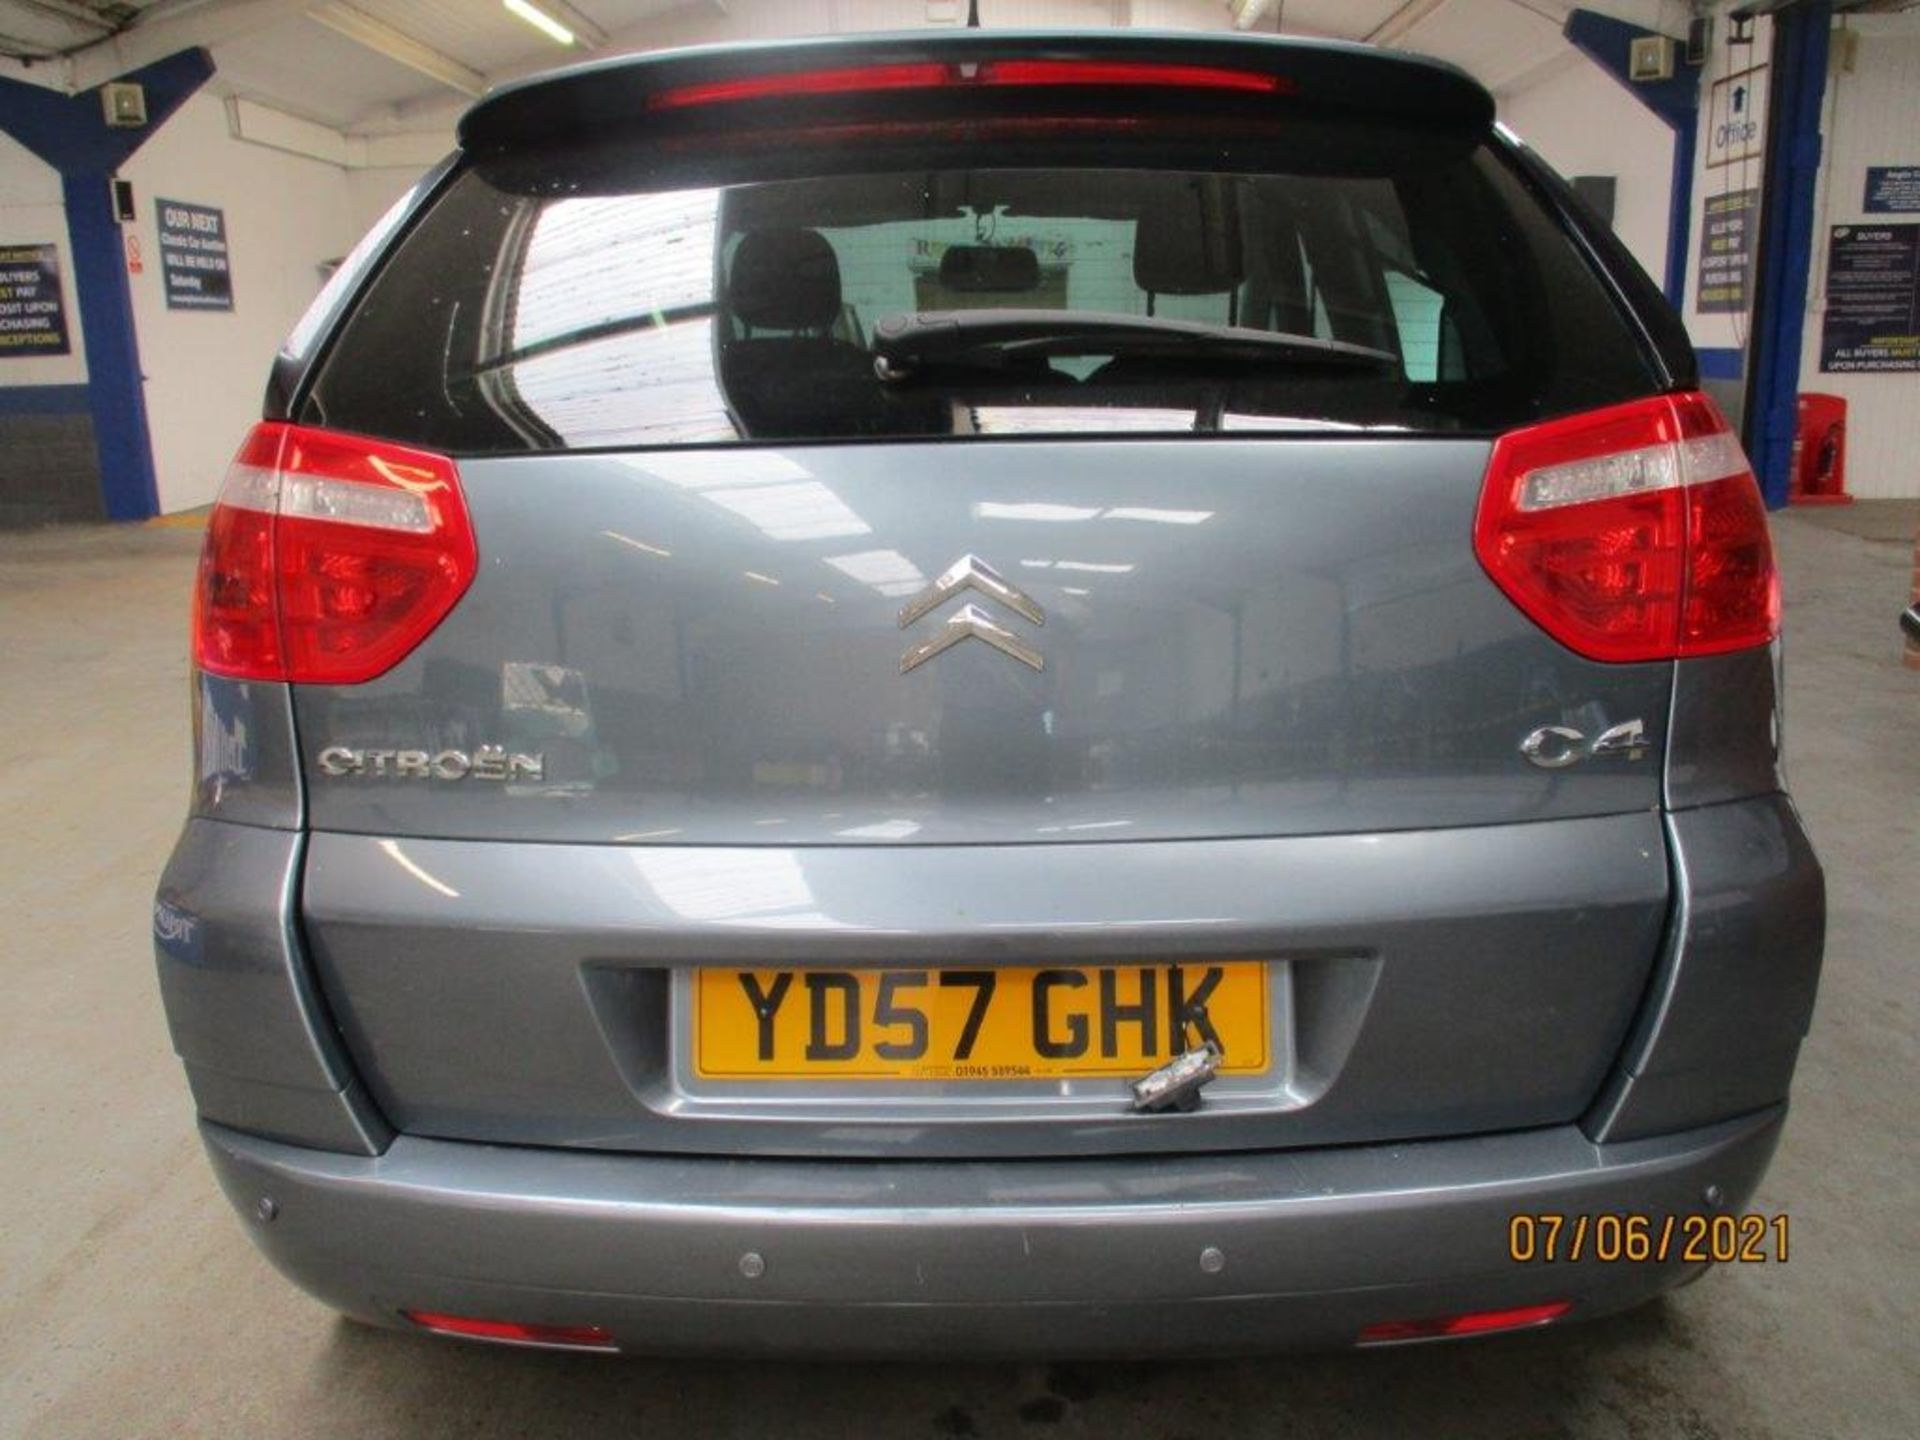 57 07 Citroen C4 Picasso 5 VTR+ HDI - Image 5 of 17